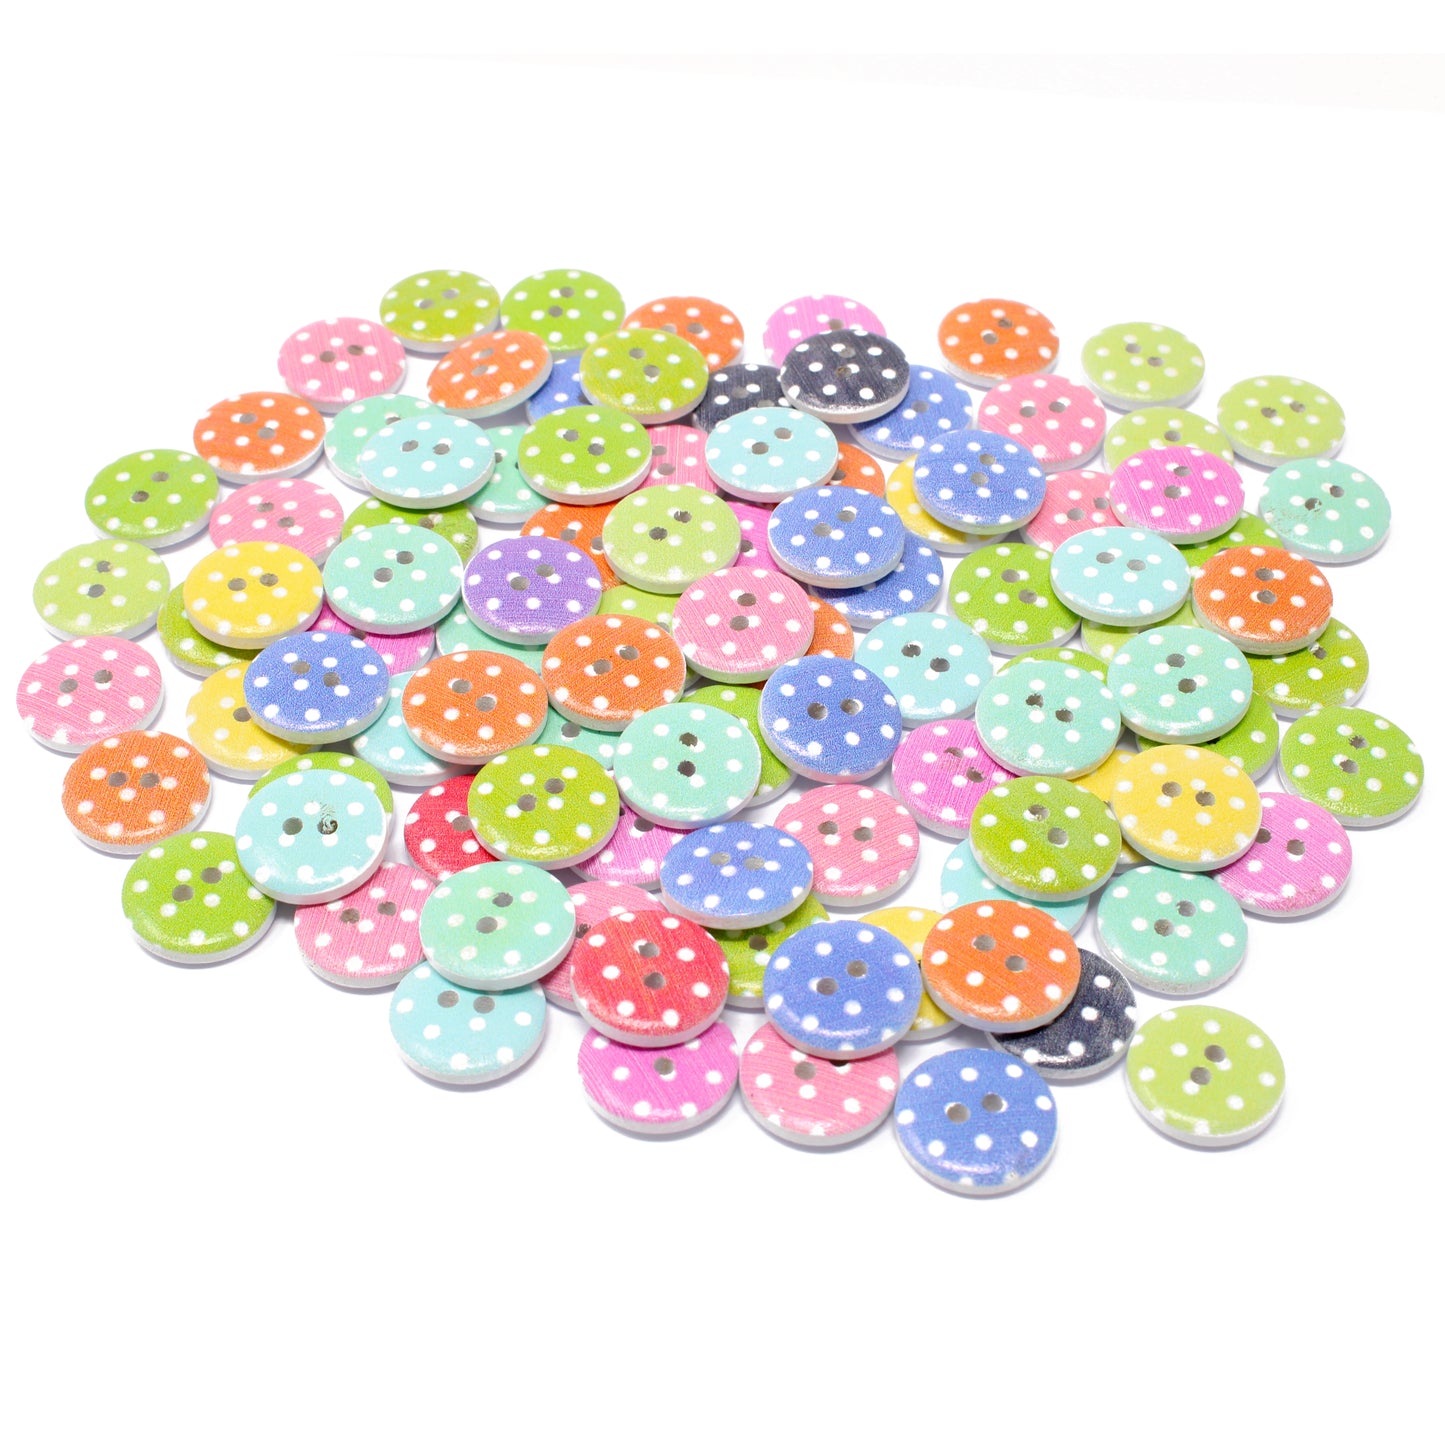 Spotty 100 Mixed 15mm Round Wooden Craft Buttons